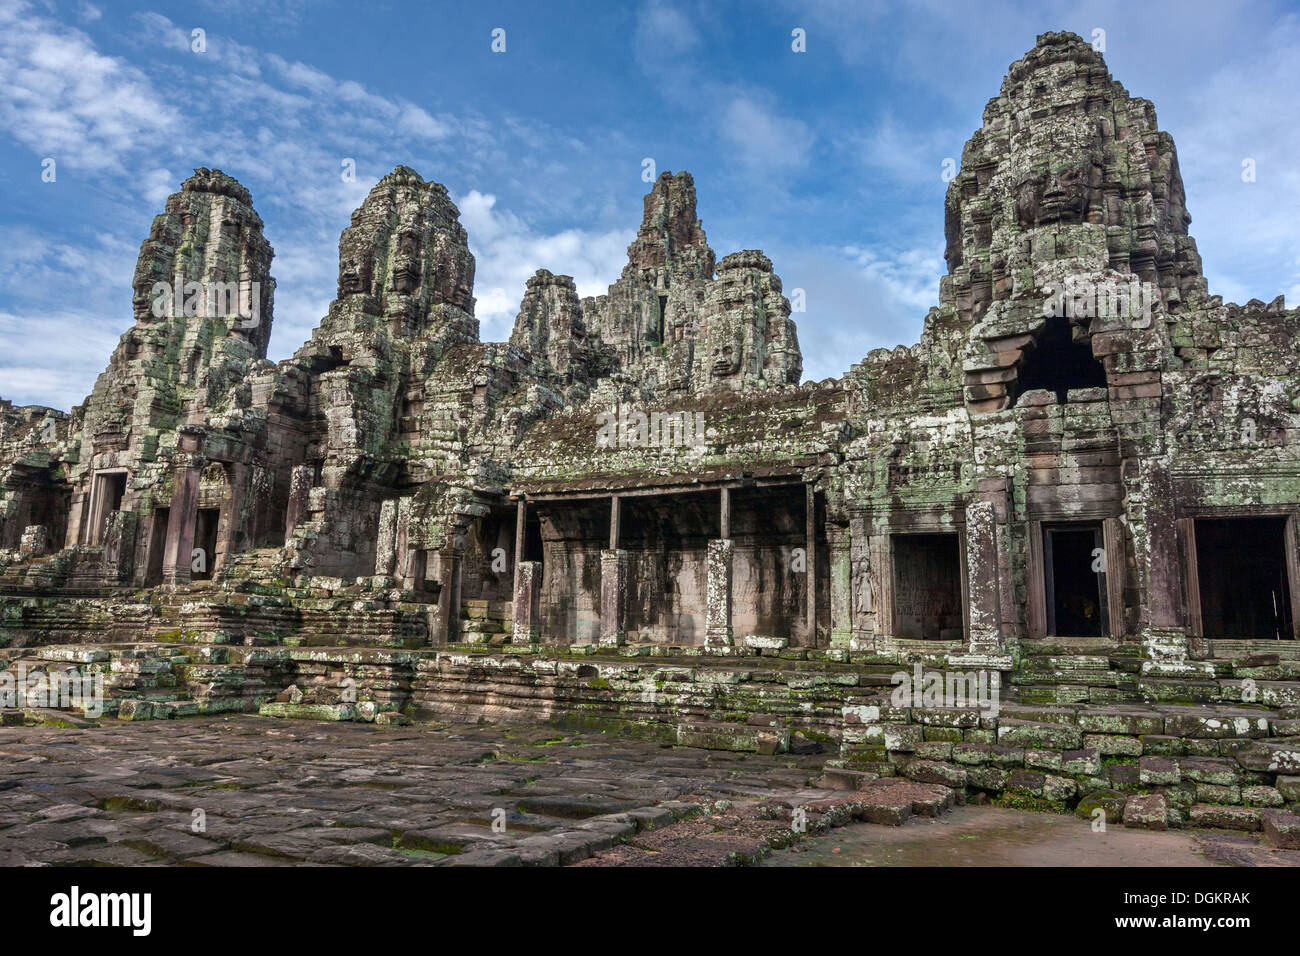 The Bayon temple complex of Angkor Thom. Stock Photo